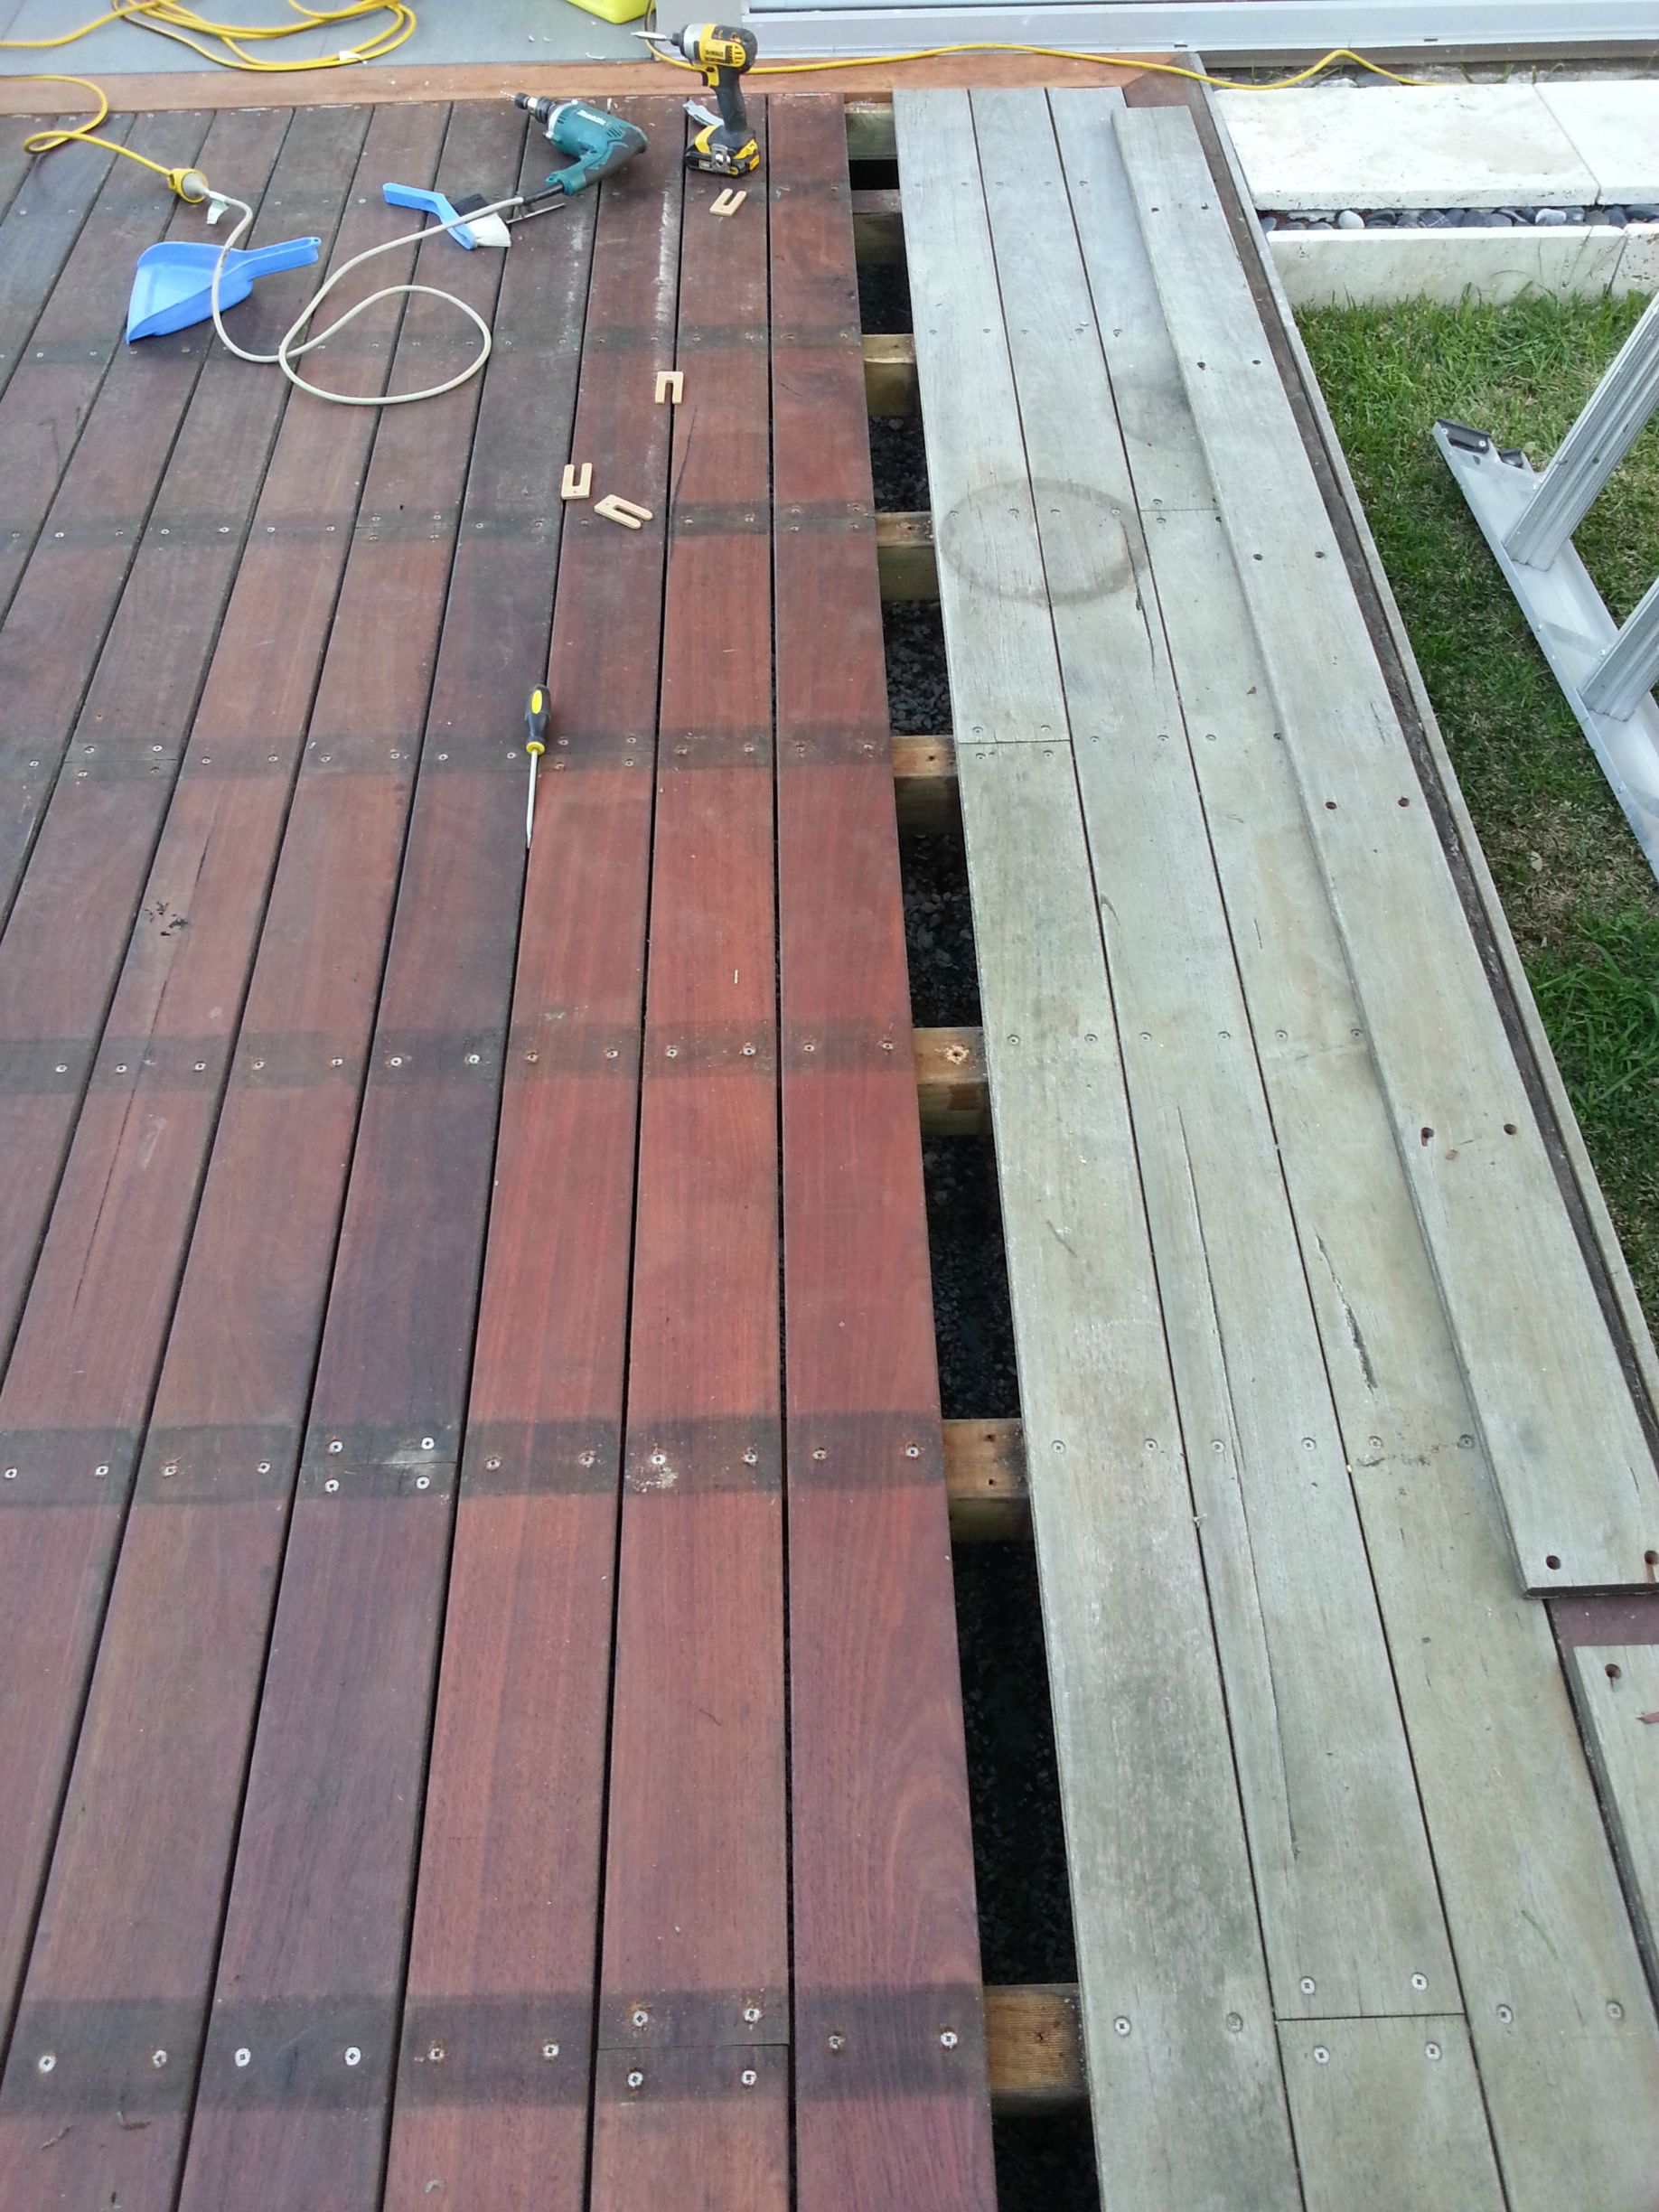 Psa After Youve Built Your Nice New Timber Deck Make Sure To with regard to dimensions 1836 X 2448